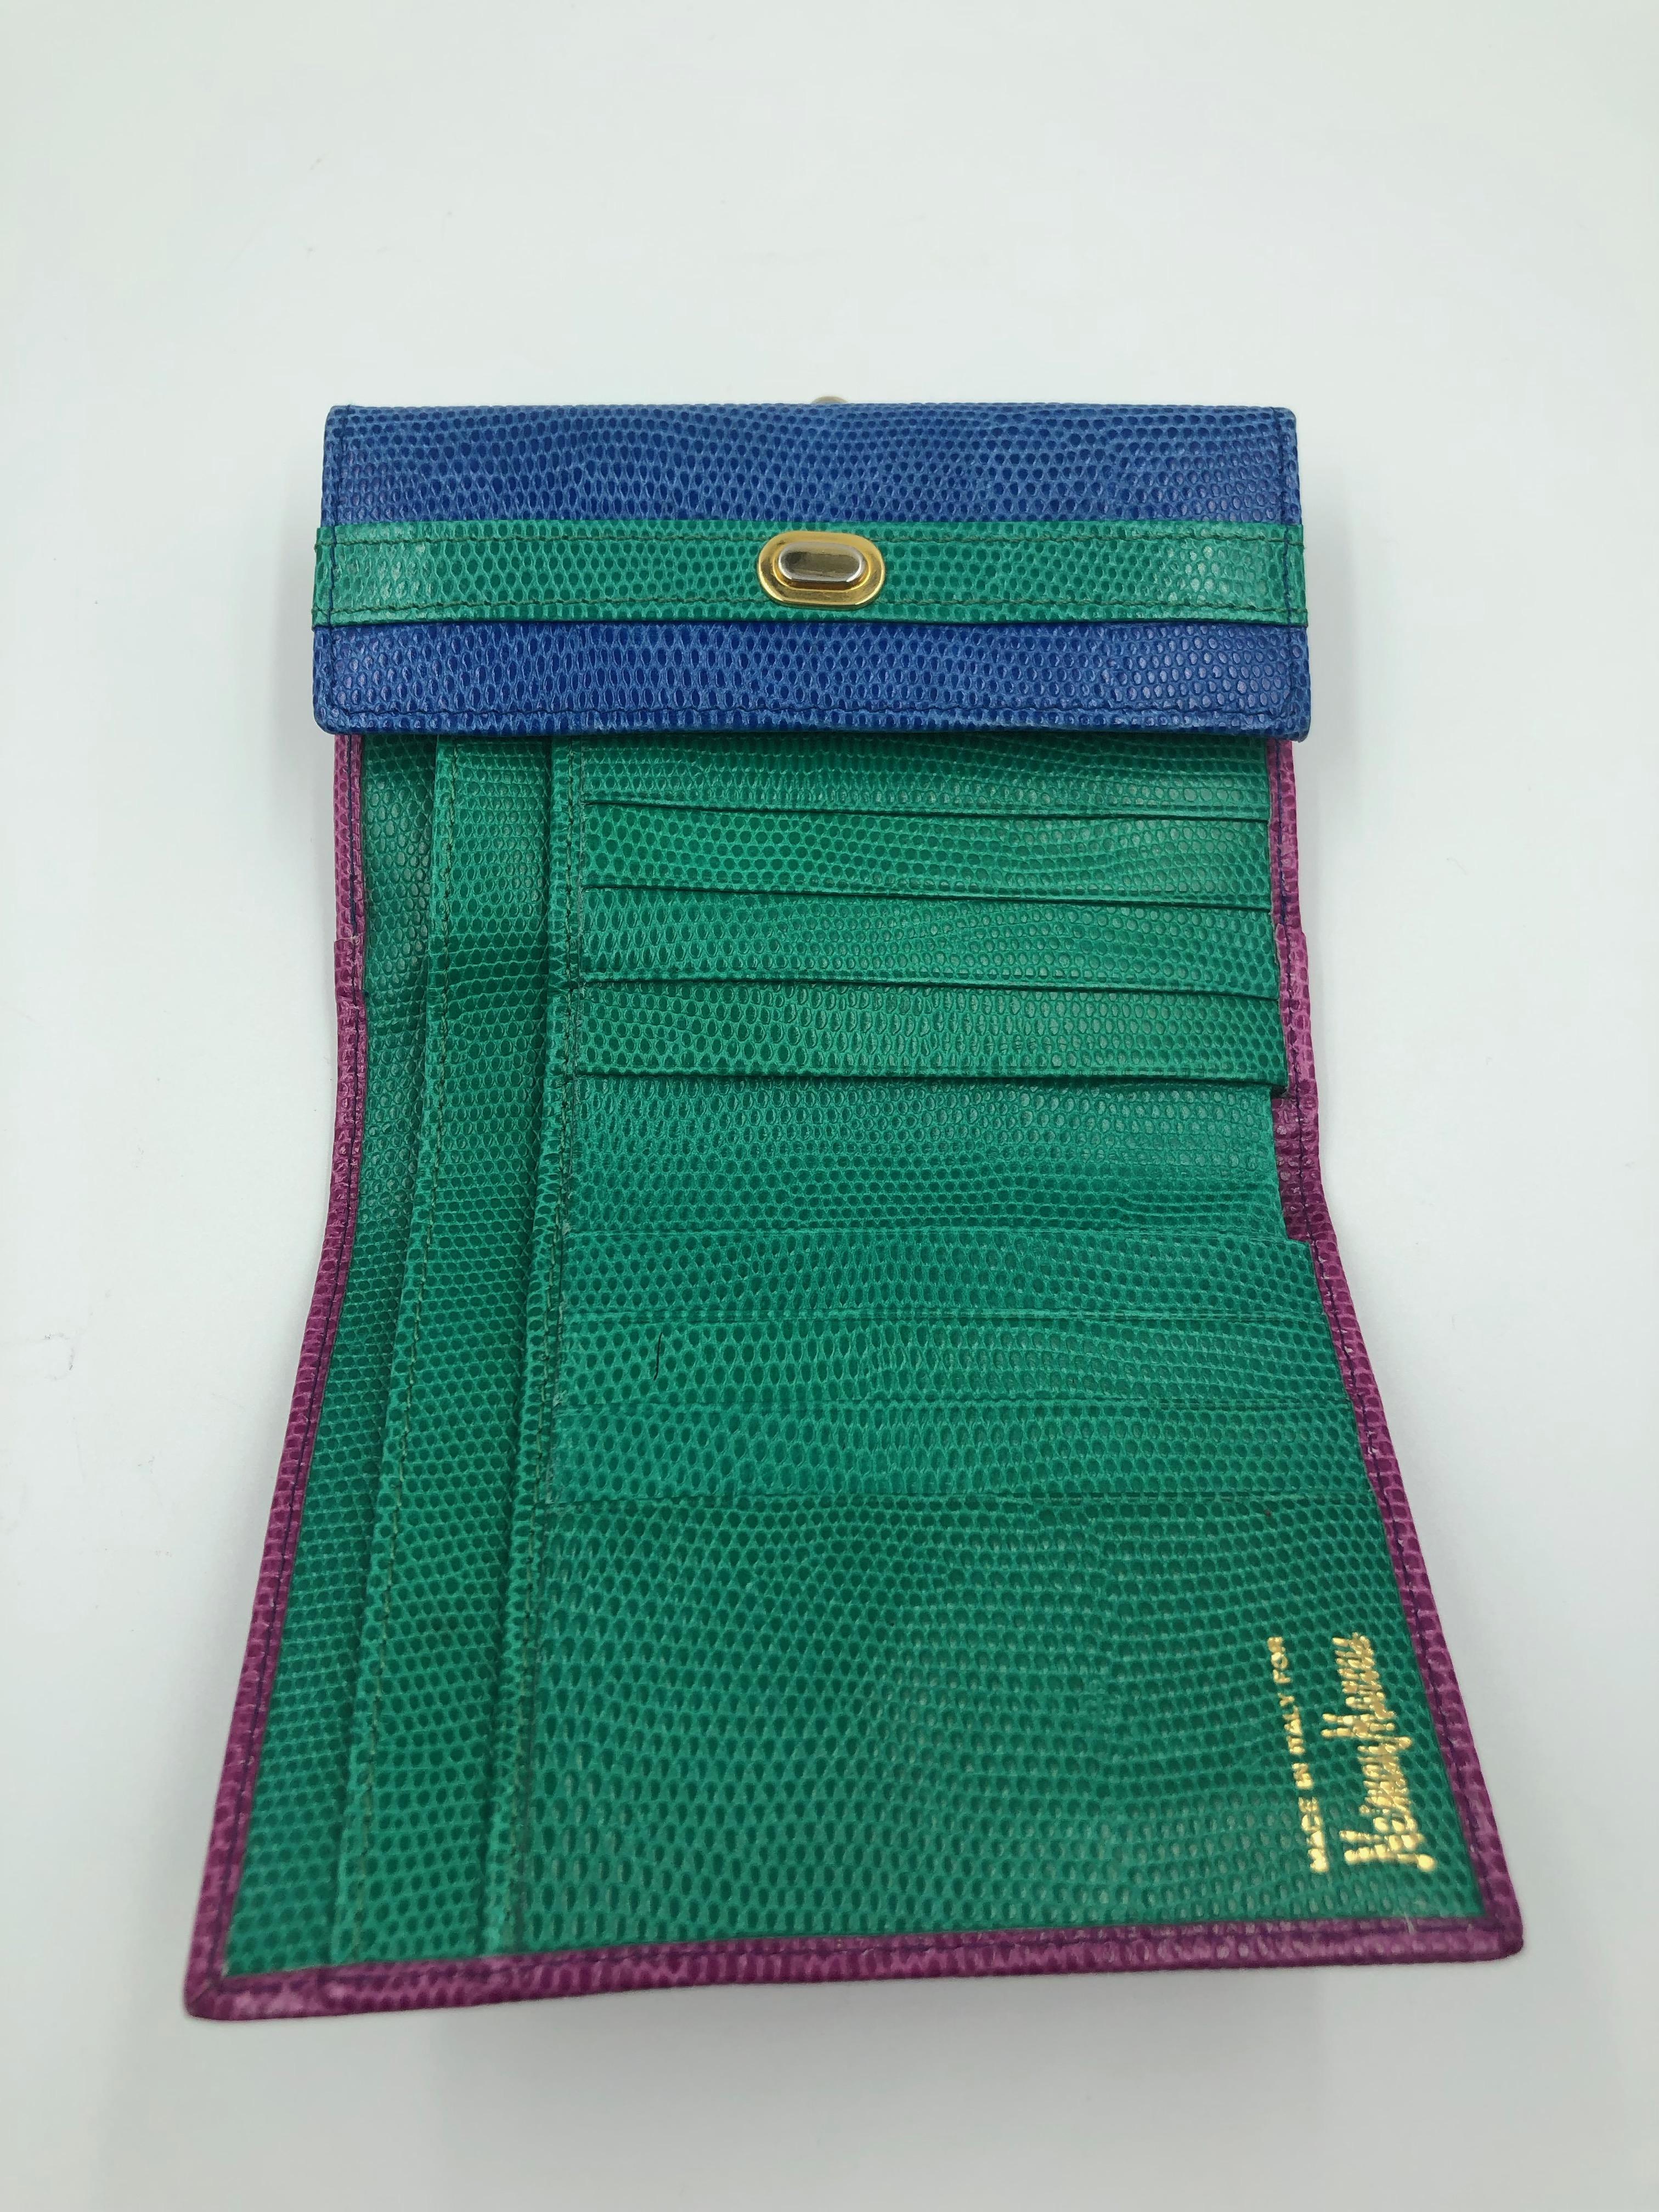 Purple Neiman Marcus Multicolor Trifold Leather Wallet and Change Purse